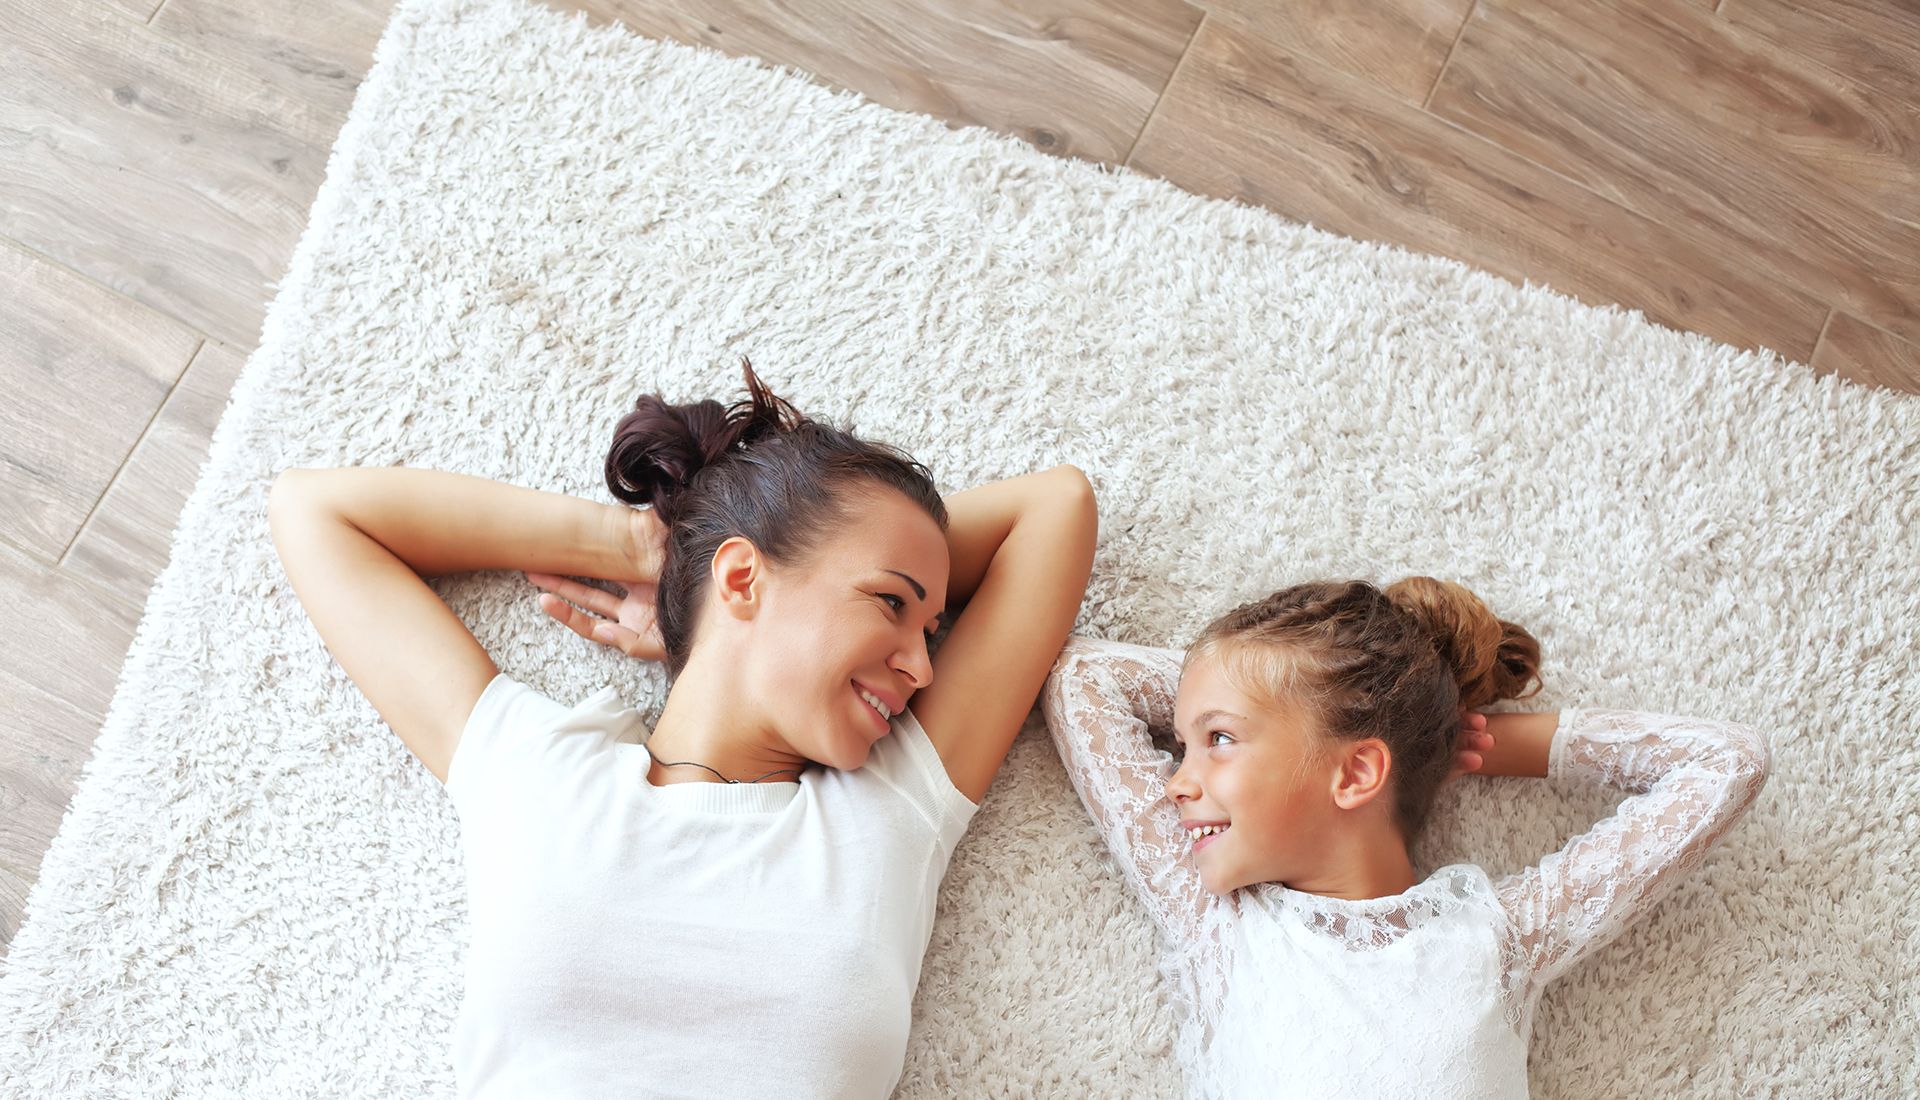 Mother and daughter lying on white rug over hardwood floors